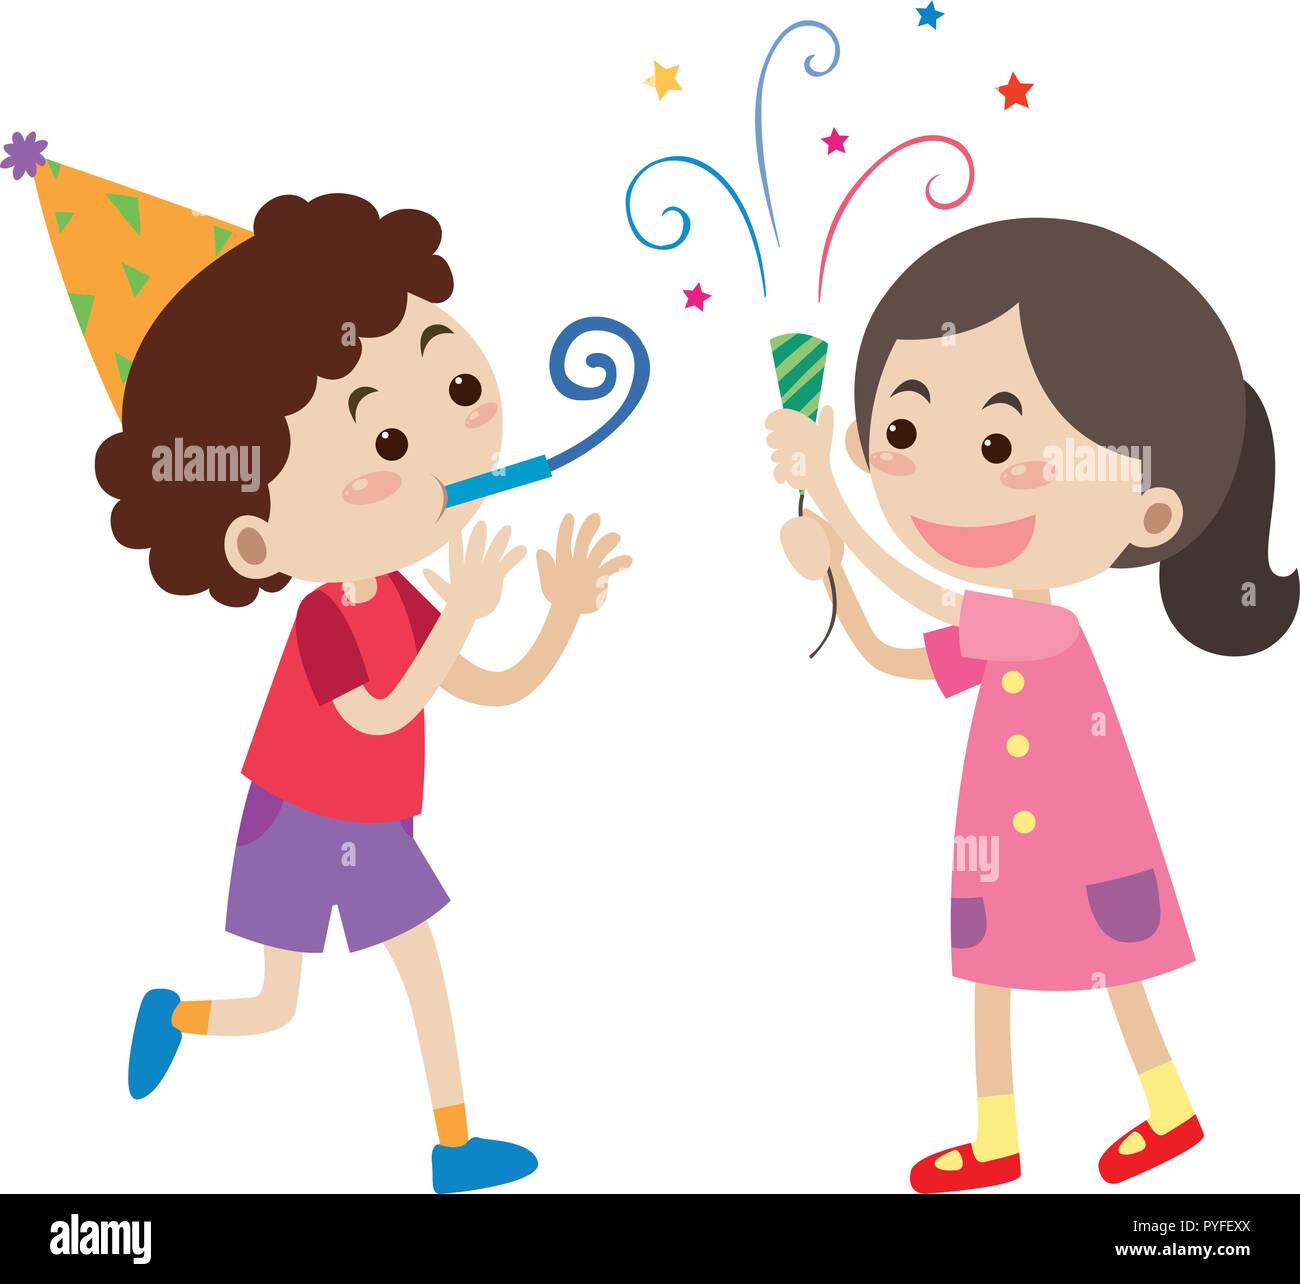 Boy and girl at party  illustration Stock Vector